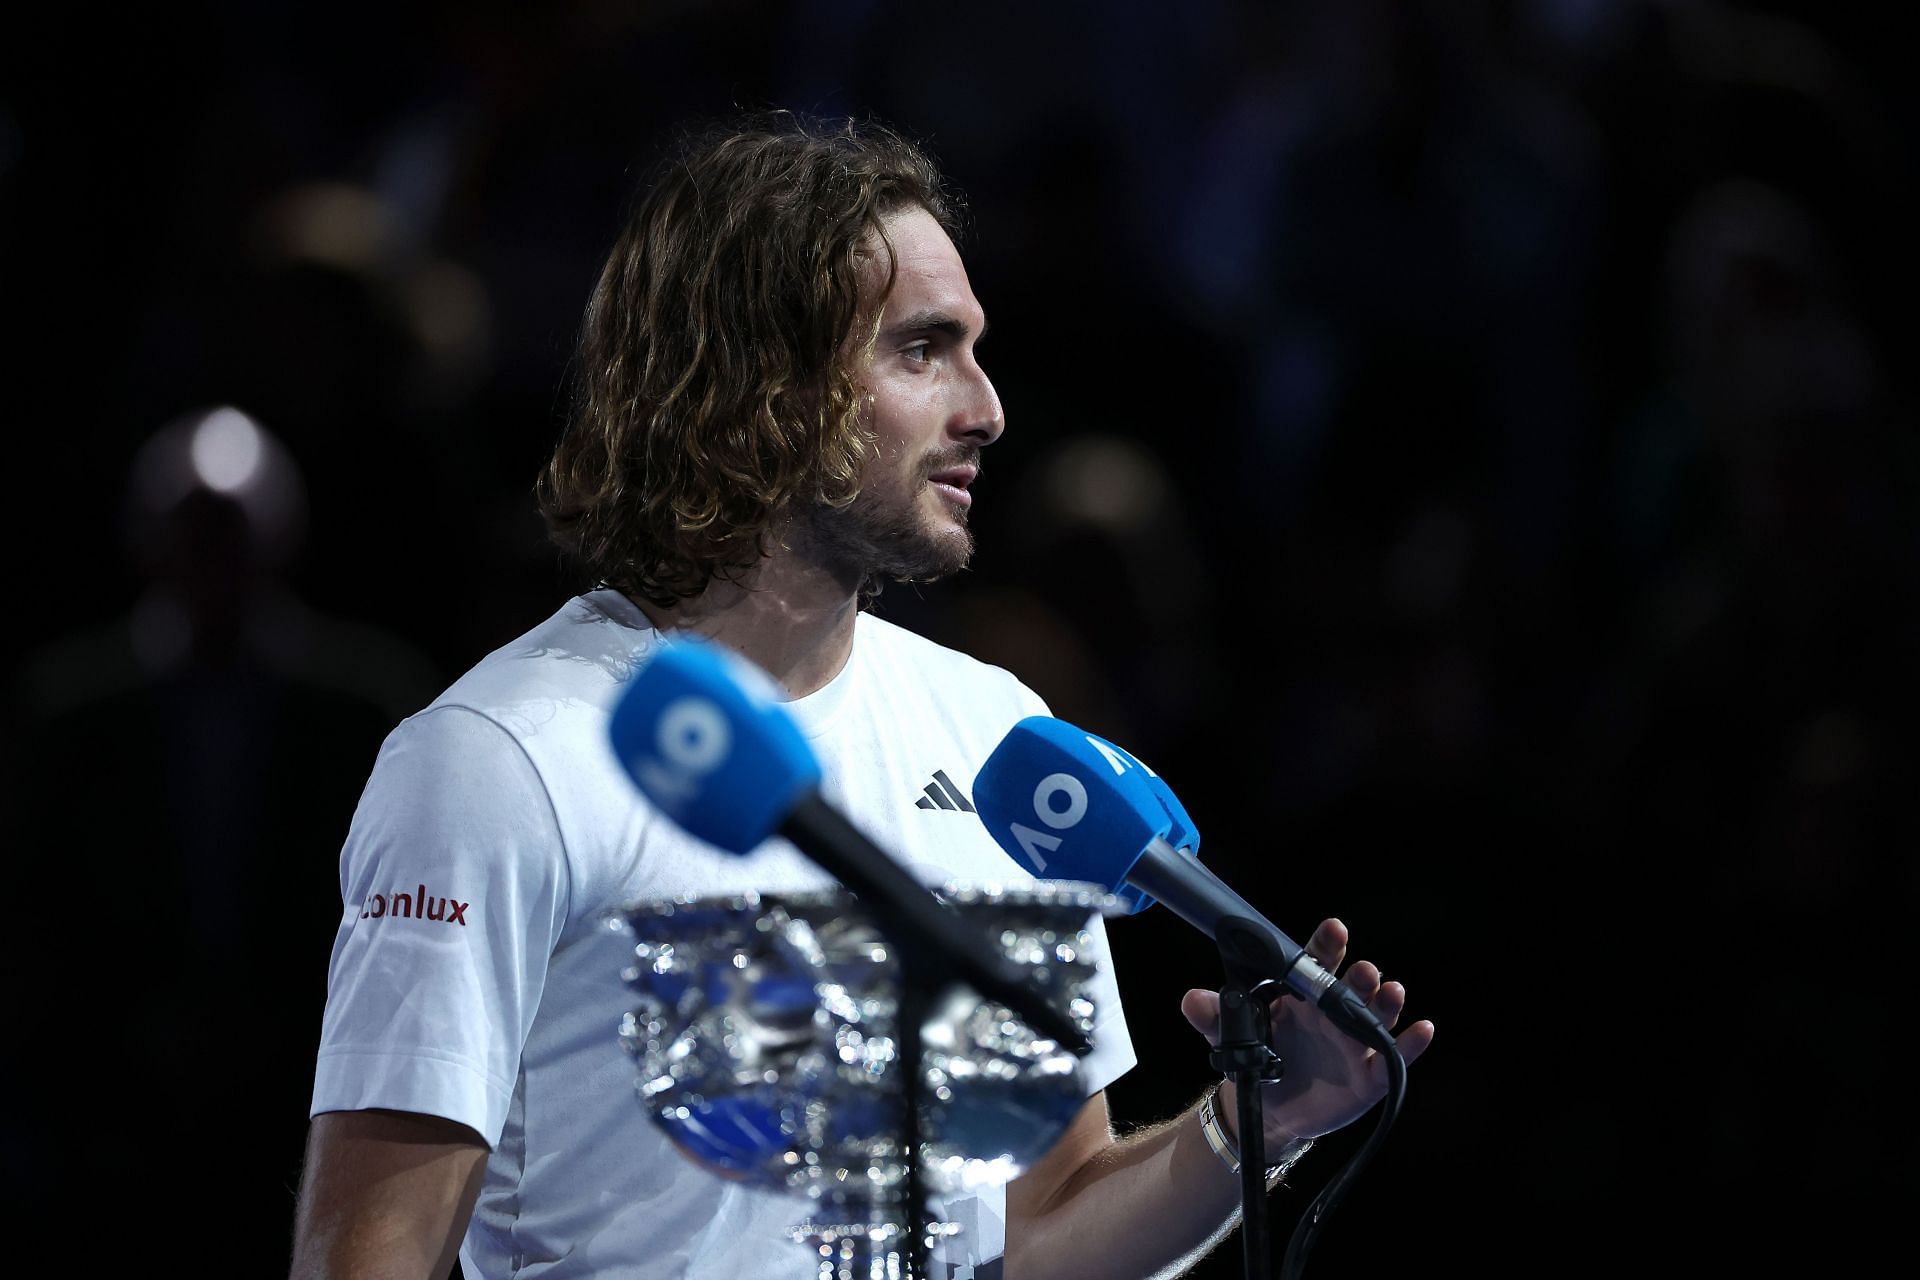 Stefanos Tsitsipas finished as the runner-up at the 2023 Australian Open.